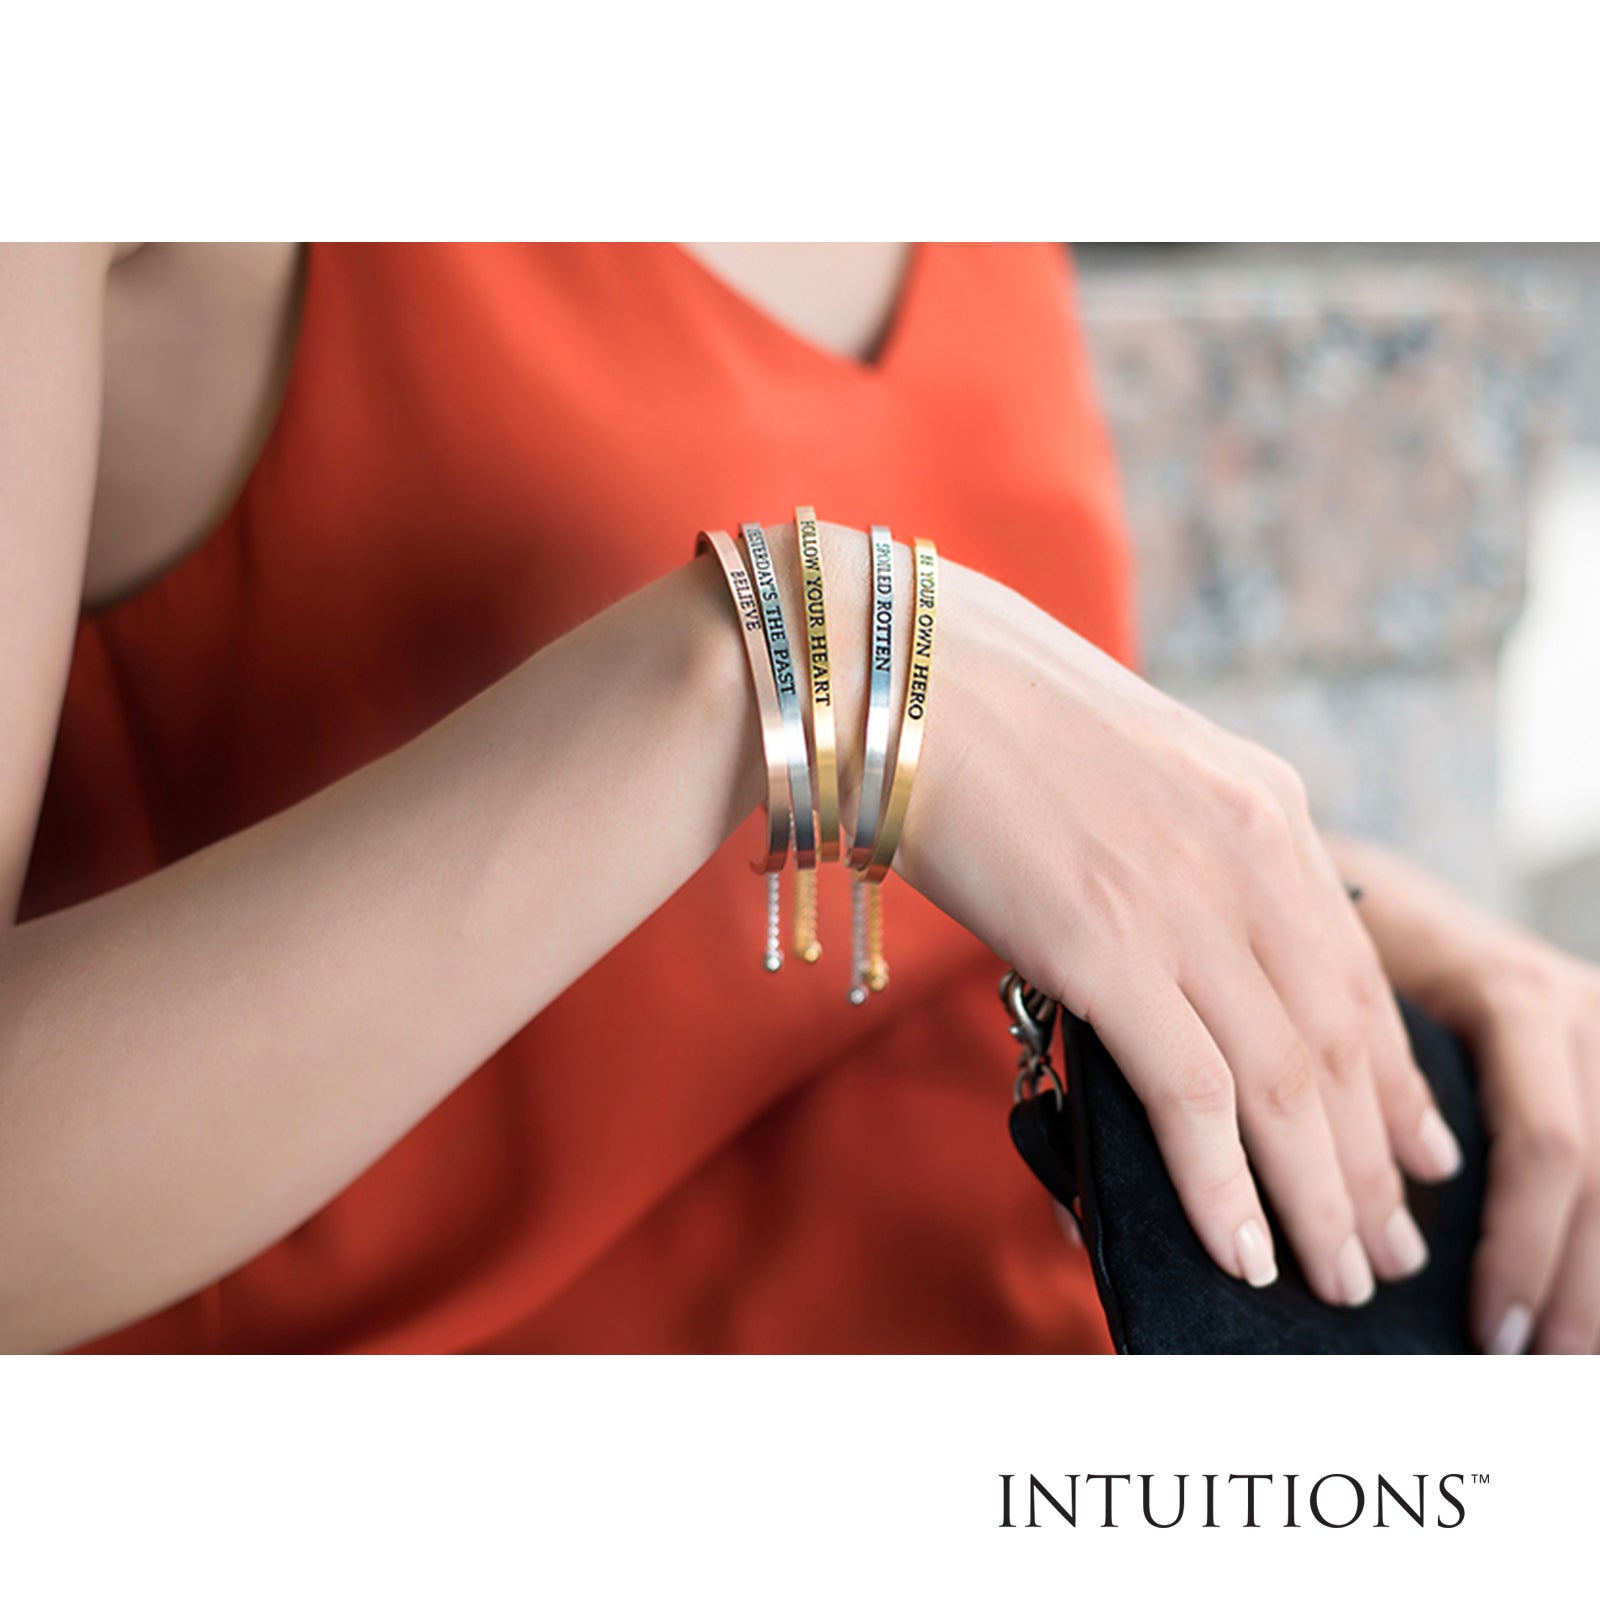 Intuitions Stainless Steel IT'S GOING TO BE A GREAT DAY Diamond Accent Cuff Bangle Bracelet fine designer jewelry for men and women